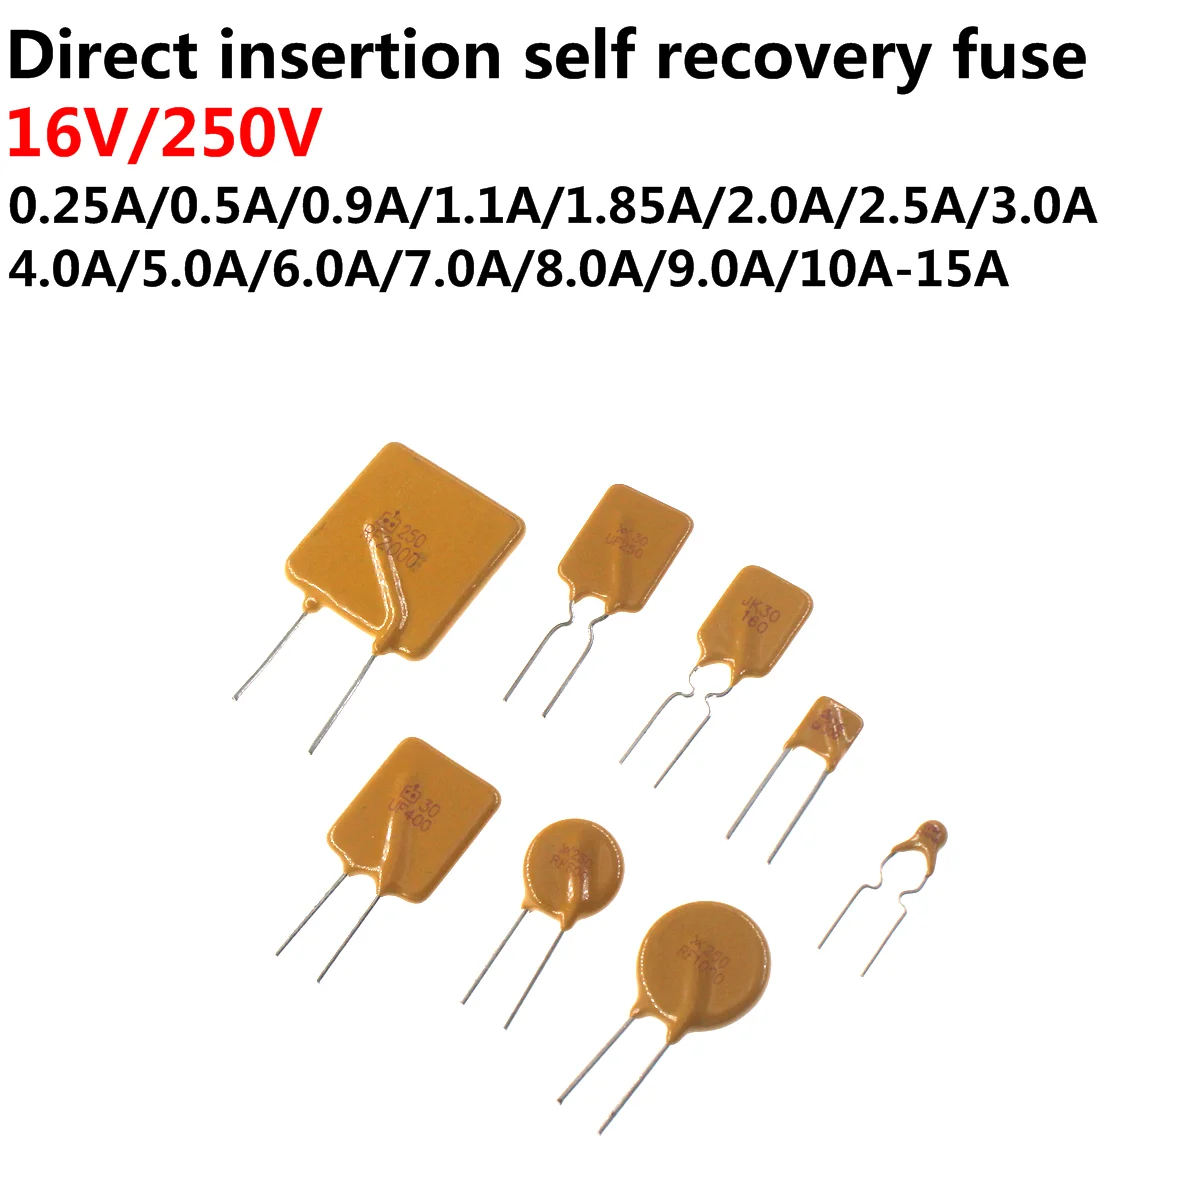 dc 1ma 20ma 30ma 50ma 100ma 200ma 300ma 500ma analog current panel meter ampere ammeter dh 670 dh670 100/50/20PCS Self Recovery Fuse JK16-1000 16V 25v 0.05a 50ma 0.1a 100ma 0.5a 500ma 1.1a 1a 1000ma 2a 3a 4a 5a  10000MA PPTC